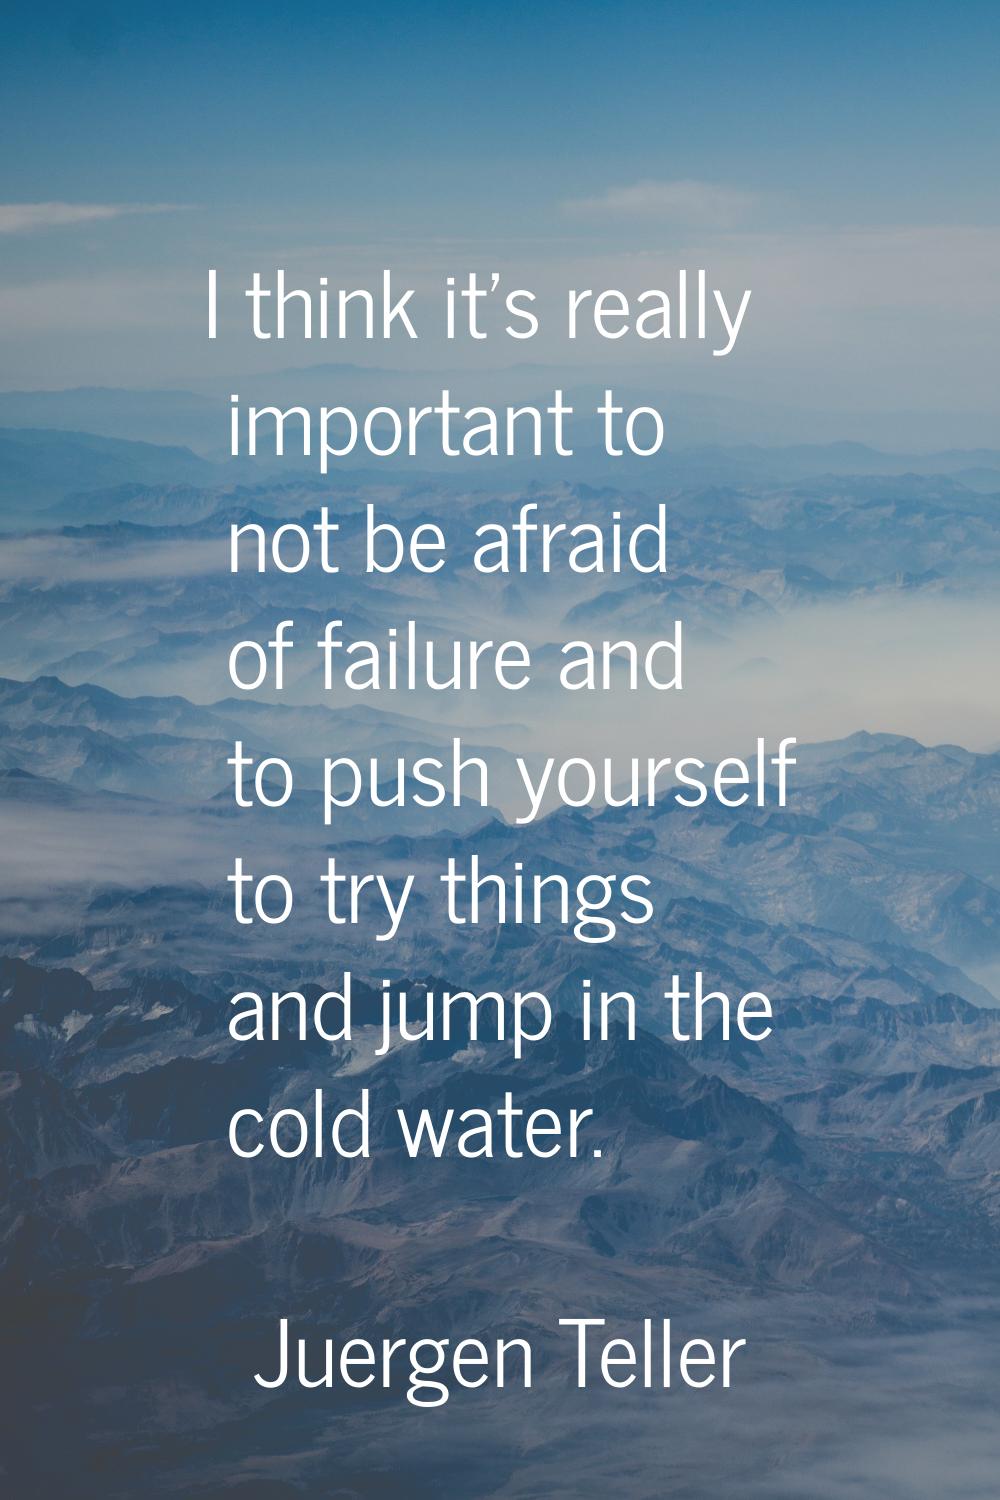 I think it's really important to not be afraid of failure and to push yourself to try things and ju